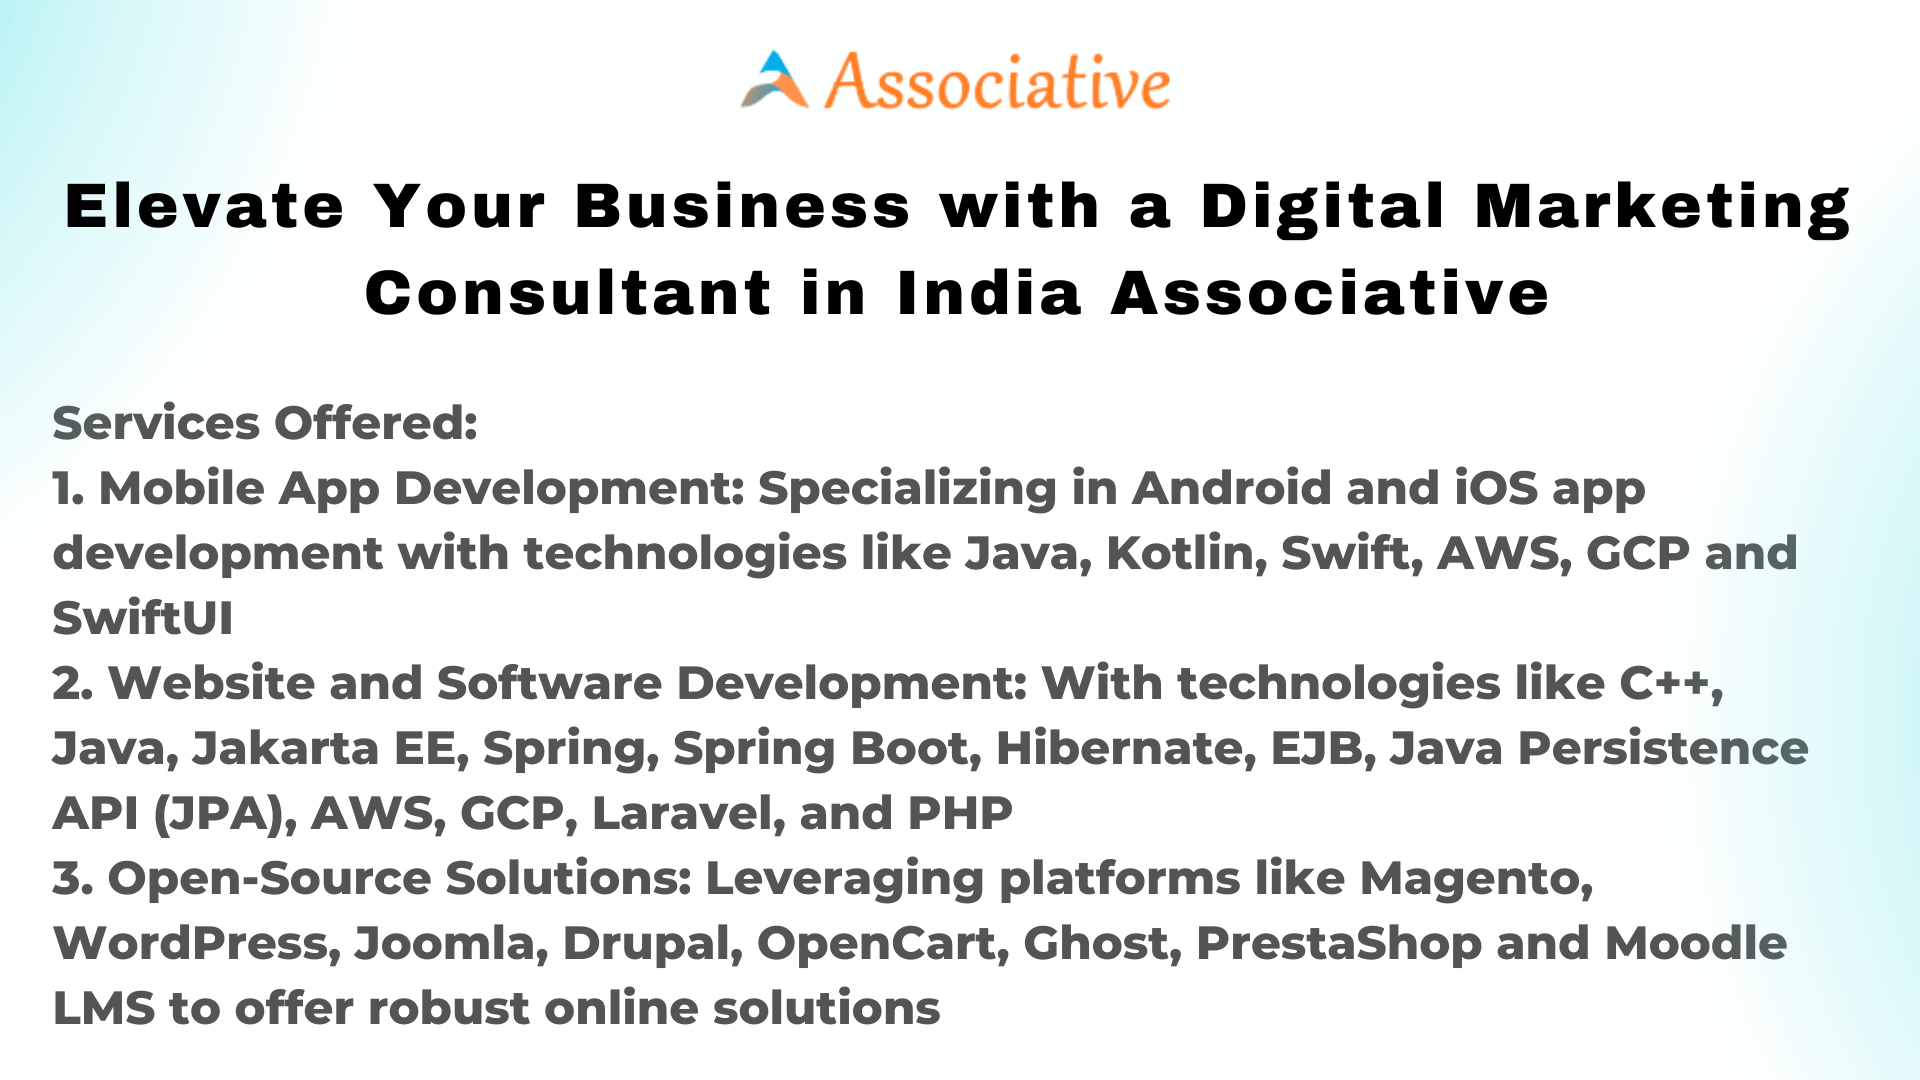 Elevate Your Business with a Digital Marketing Consultant in India Associative